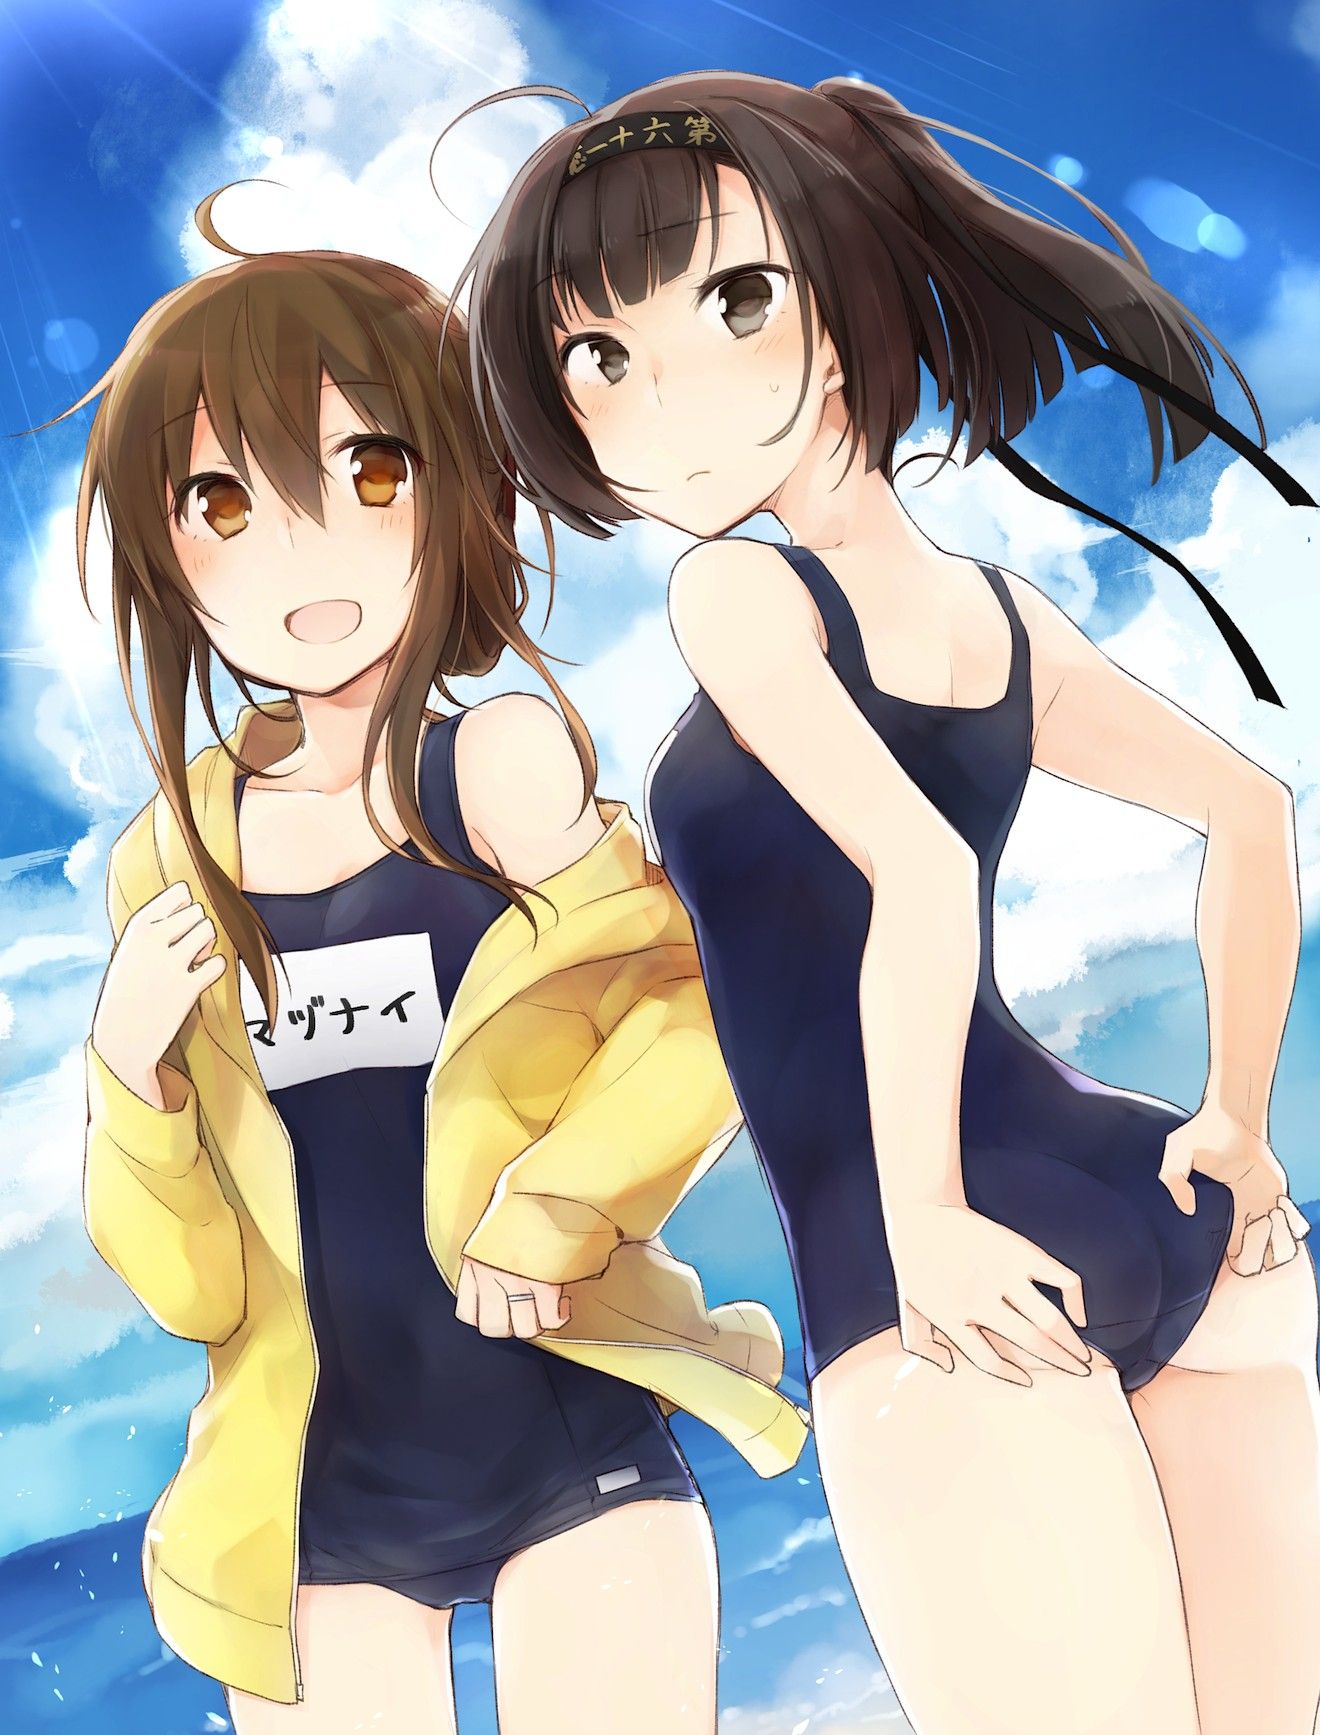 I want the image that is erotic thing in the swimsuit, please!!! 11